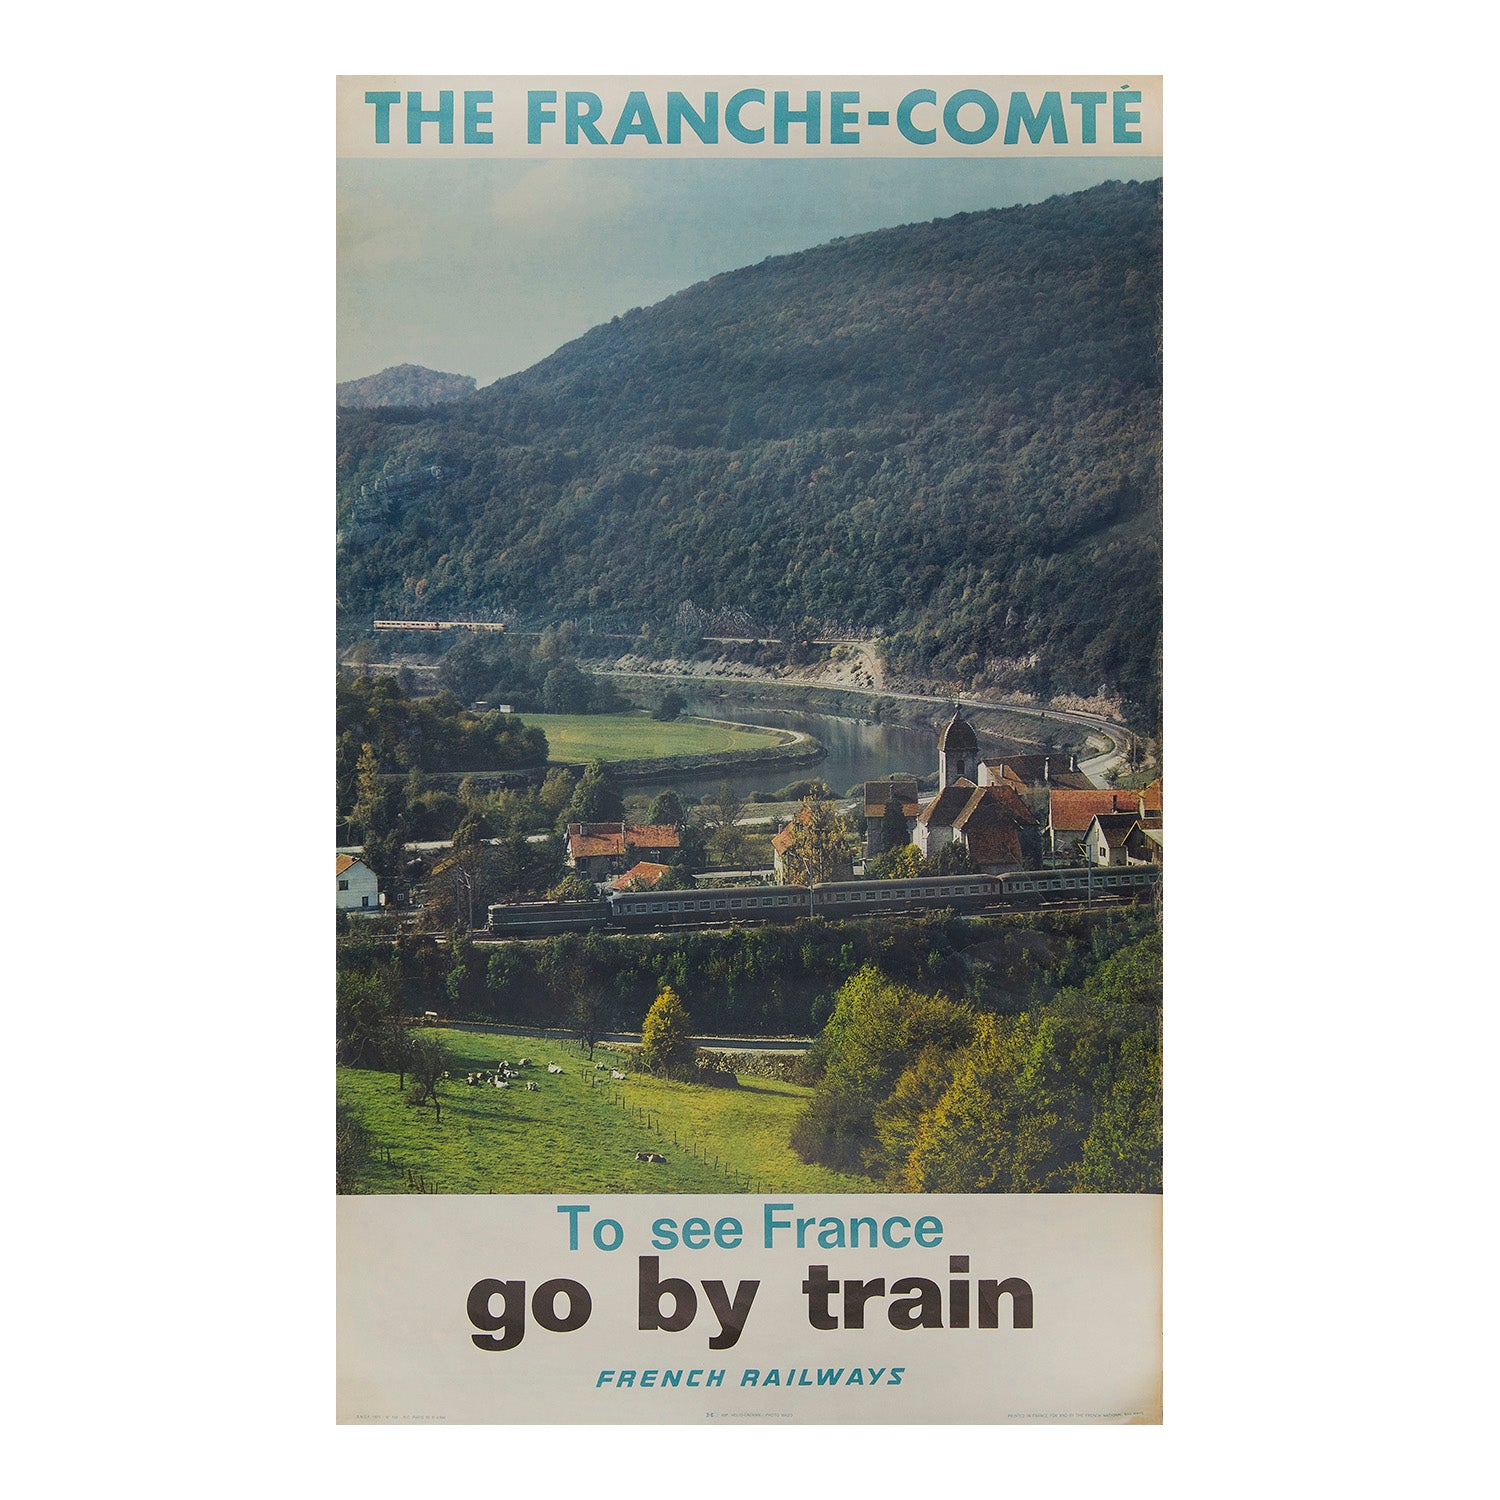 The Franche-Comté. To see France go by train. French Railways